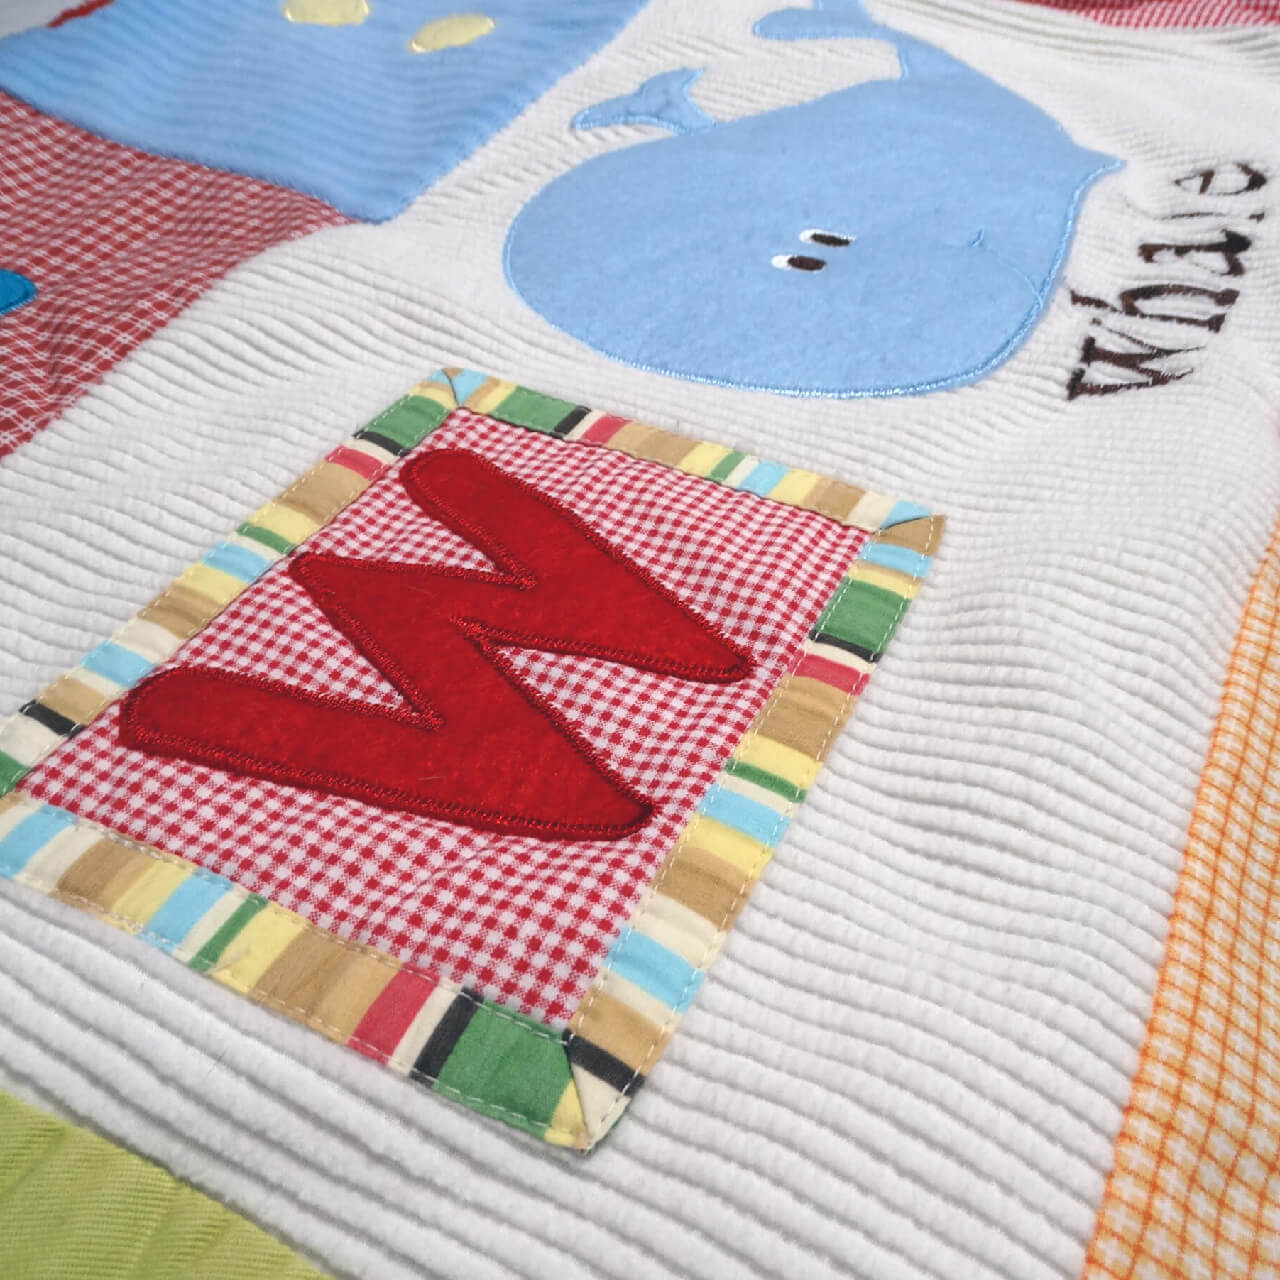 Alphabet soup blanket embroidery